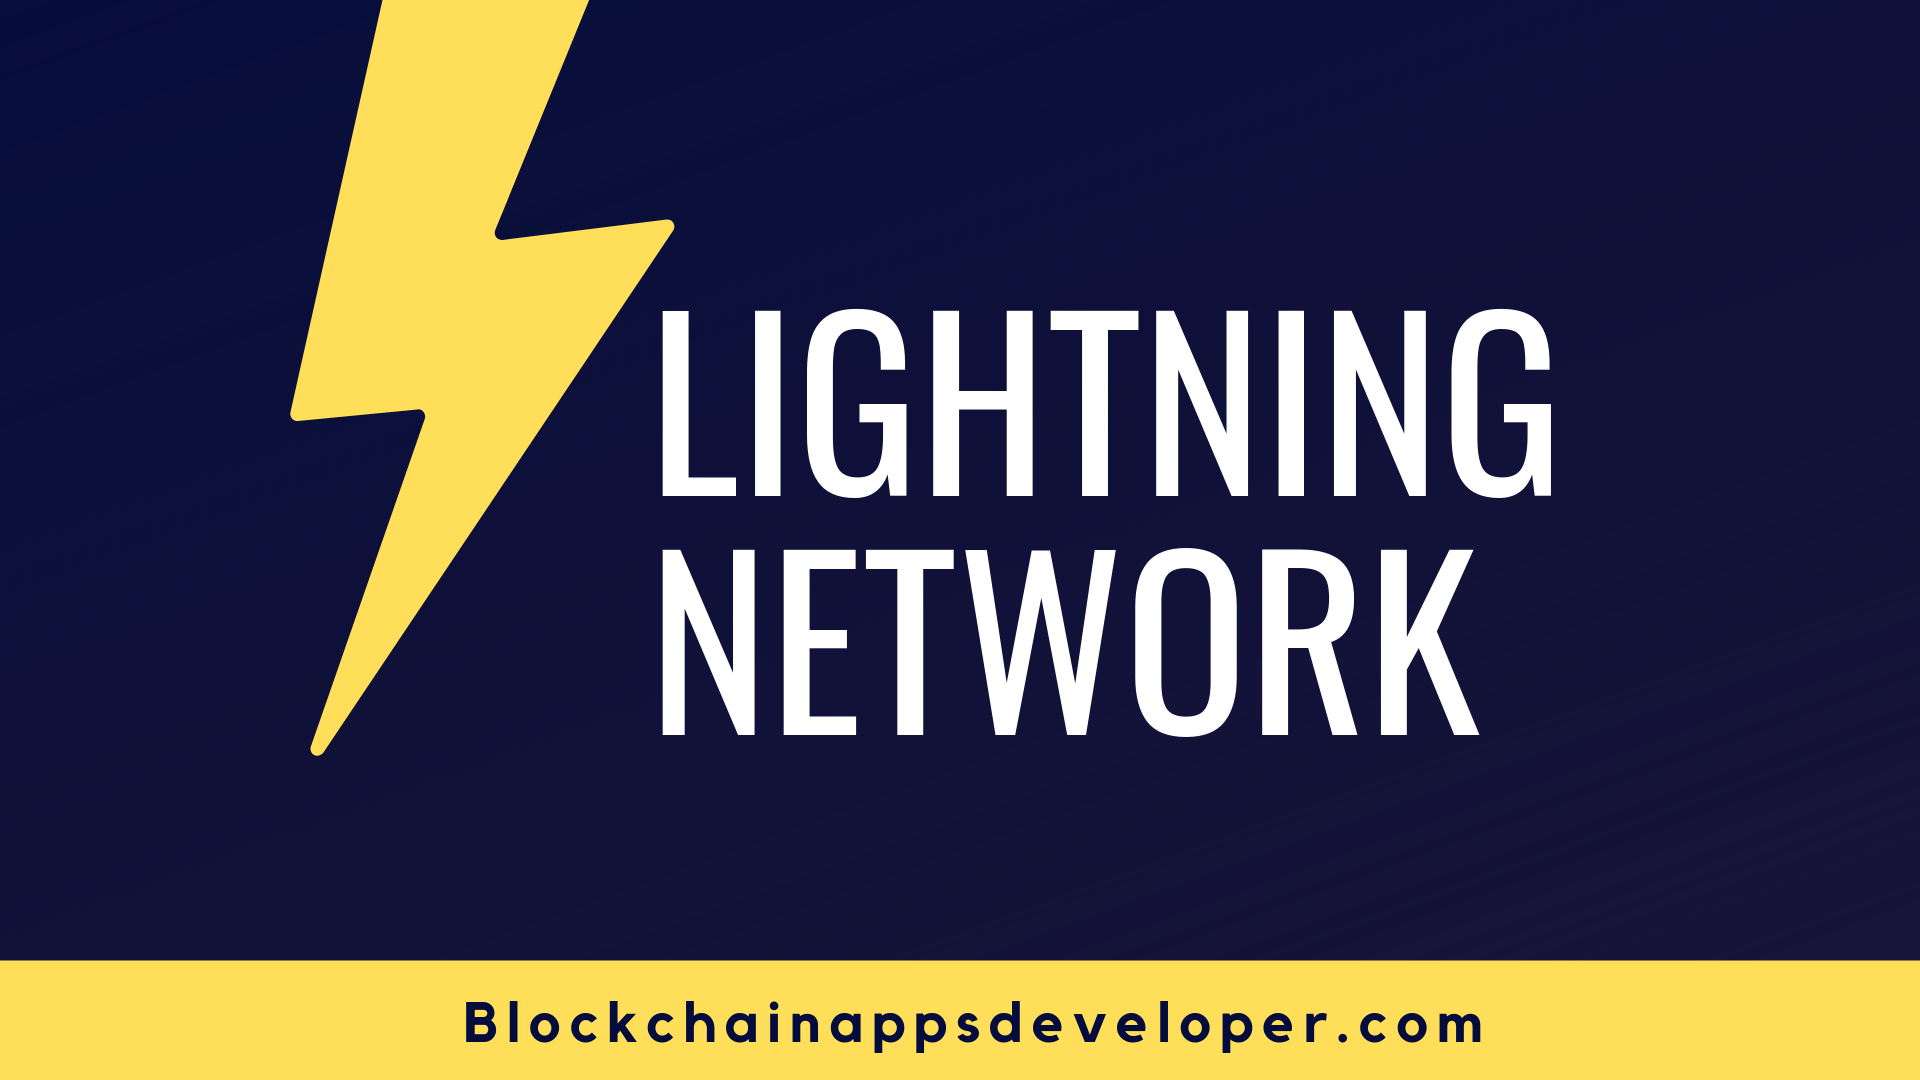 What Is Lightning Network, And Why?